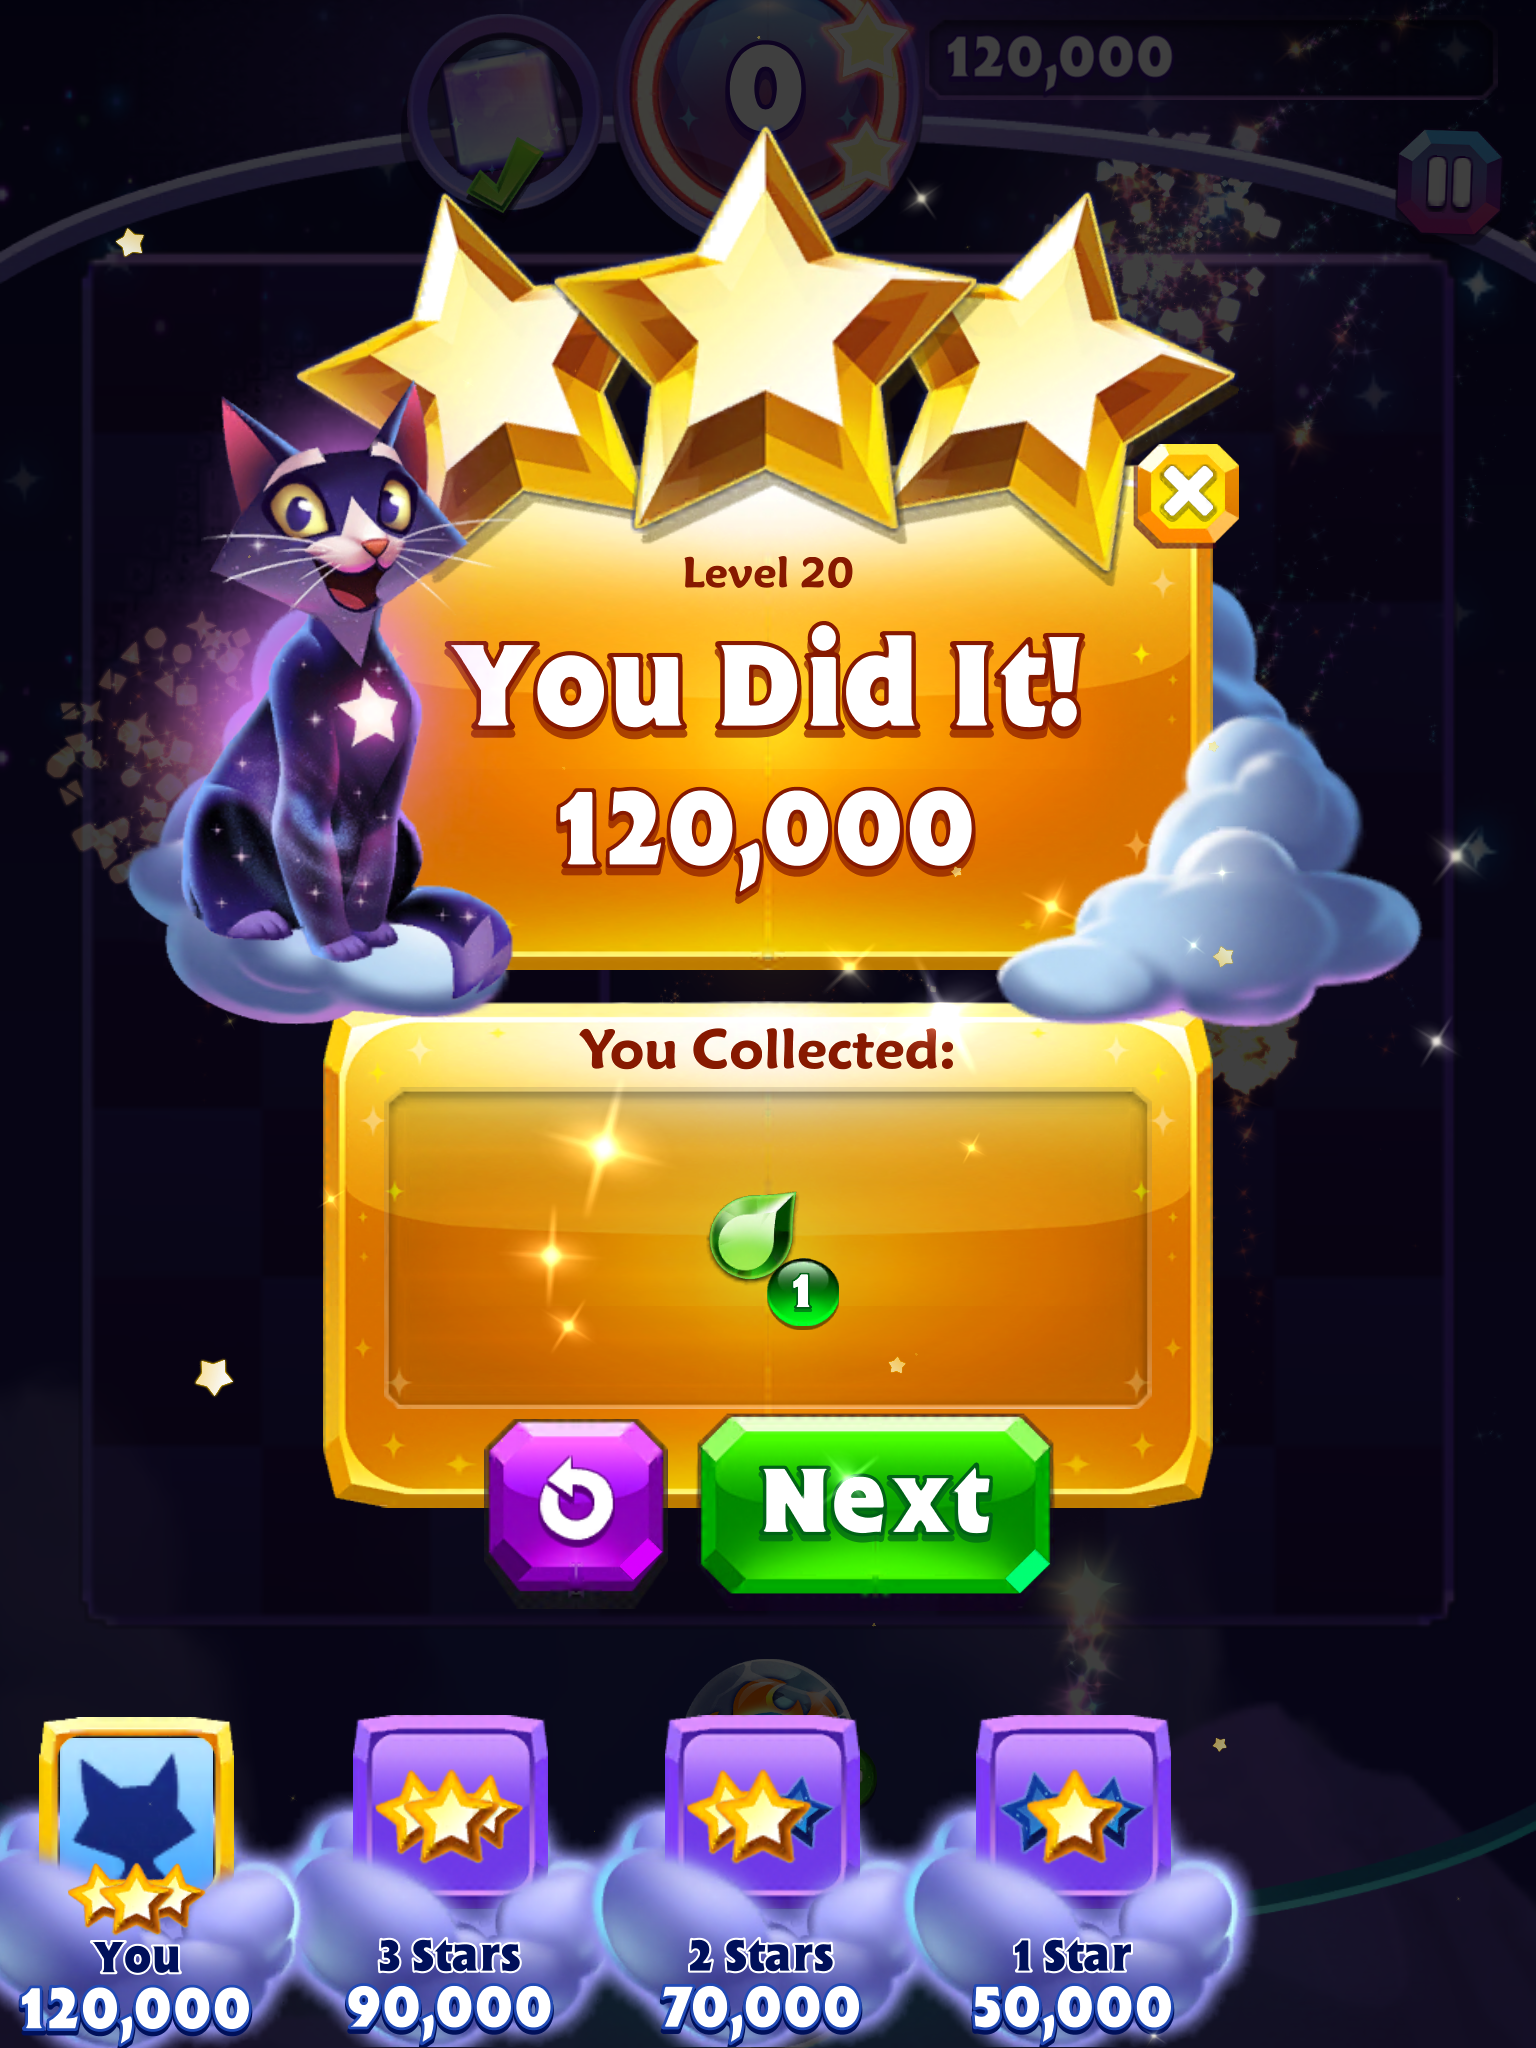 Spindy12: Bejeweled Stars: Level 20 - From the Bottom Up (iOS) 120,000 points on 2016-12-25 08:00:01